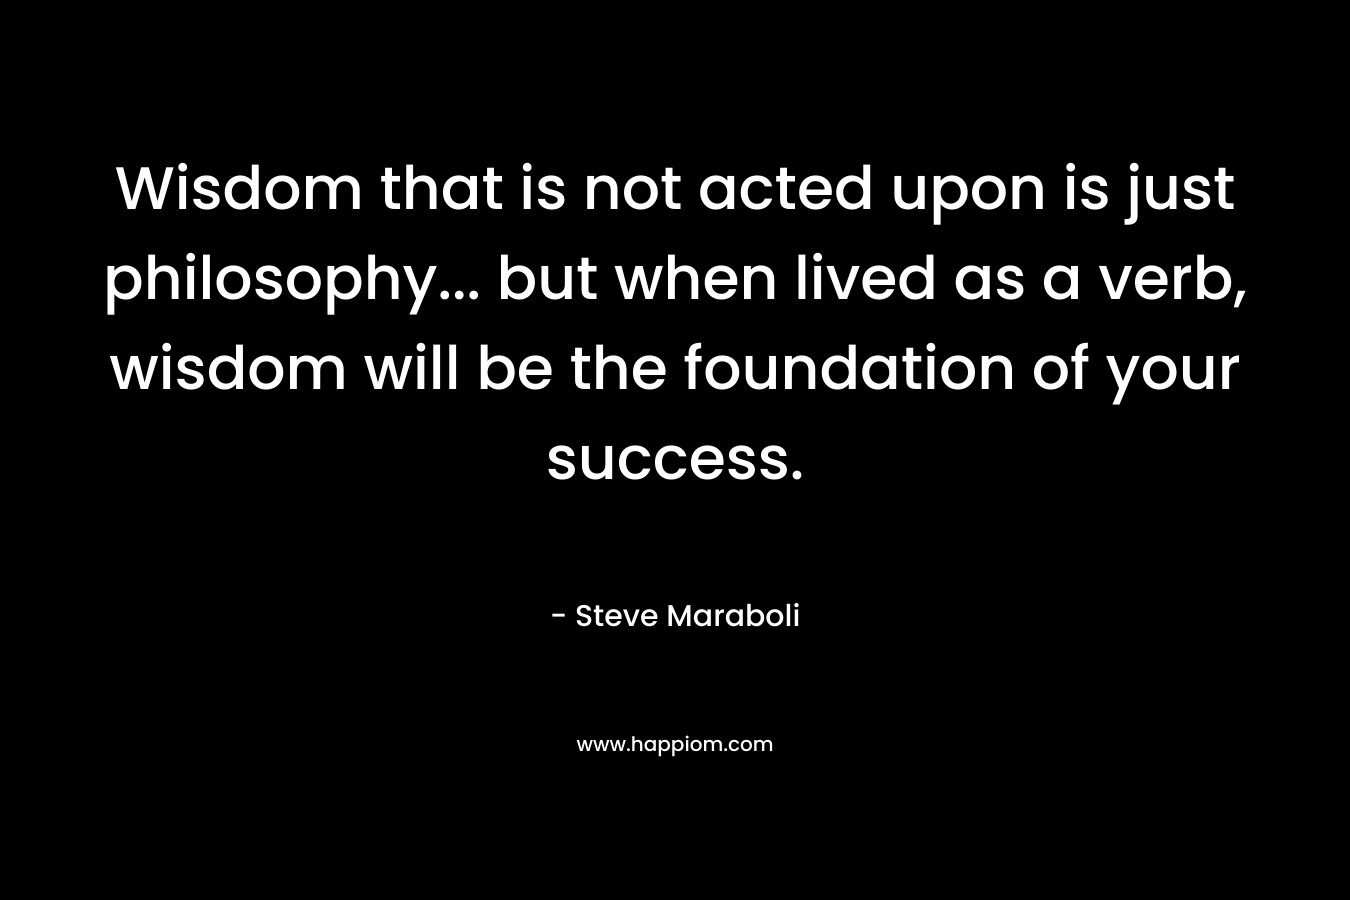 Wisdom that is not acted upon is just philosophy... but when lived as a verb, wisdom will be the foundation of your success.